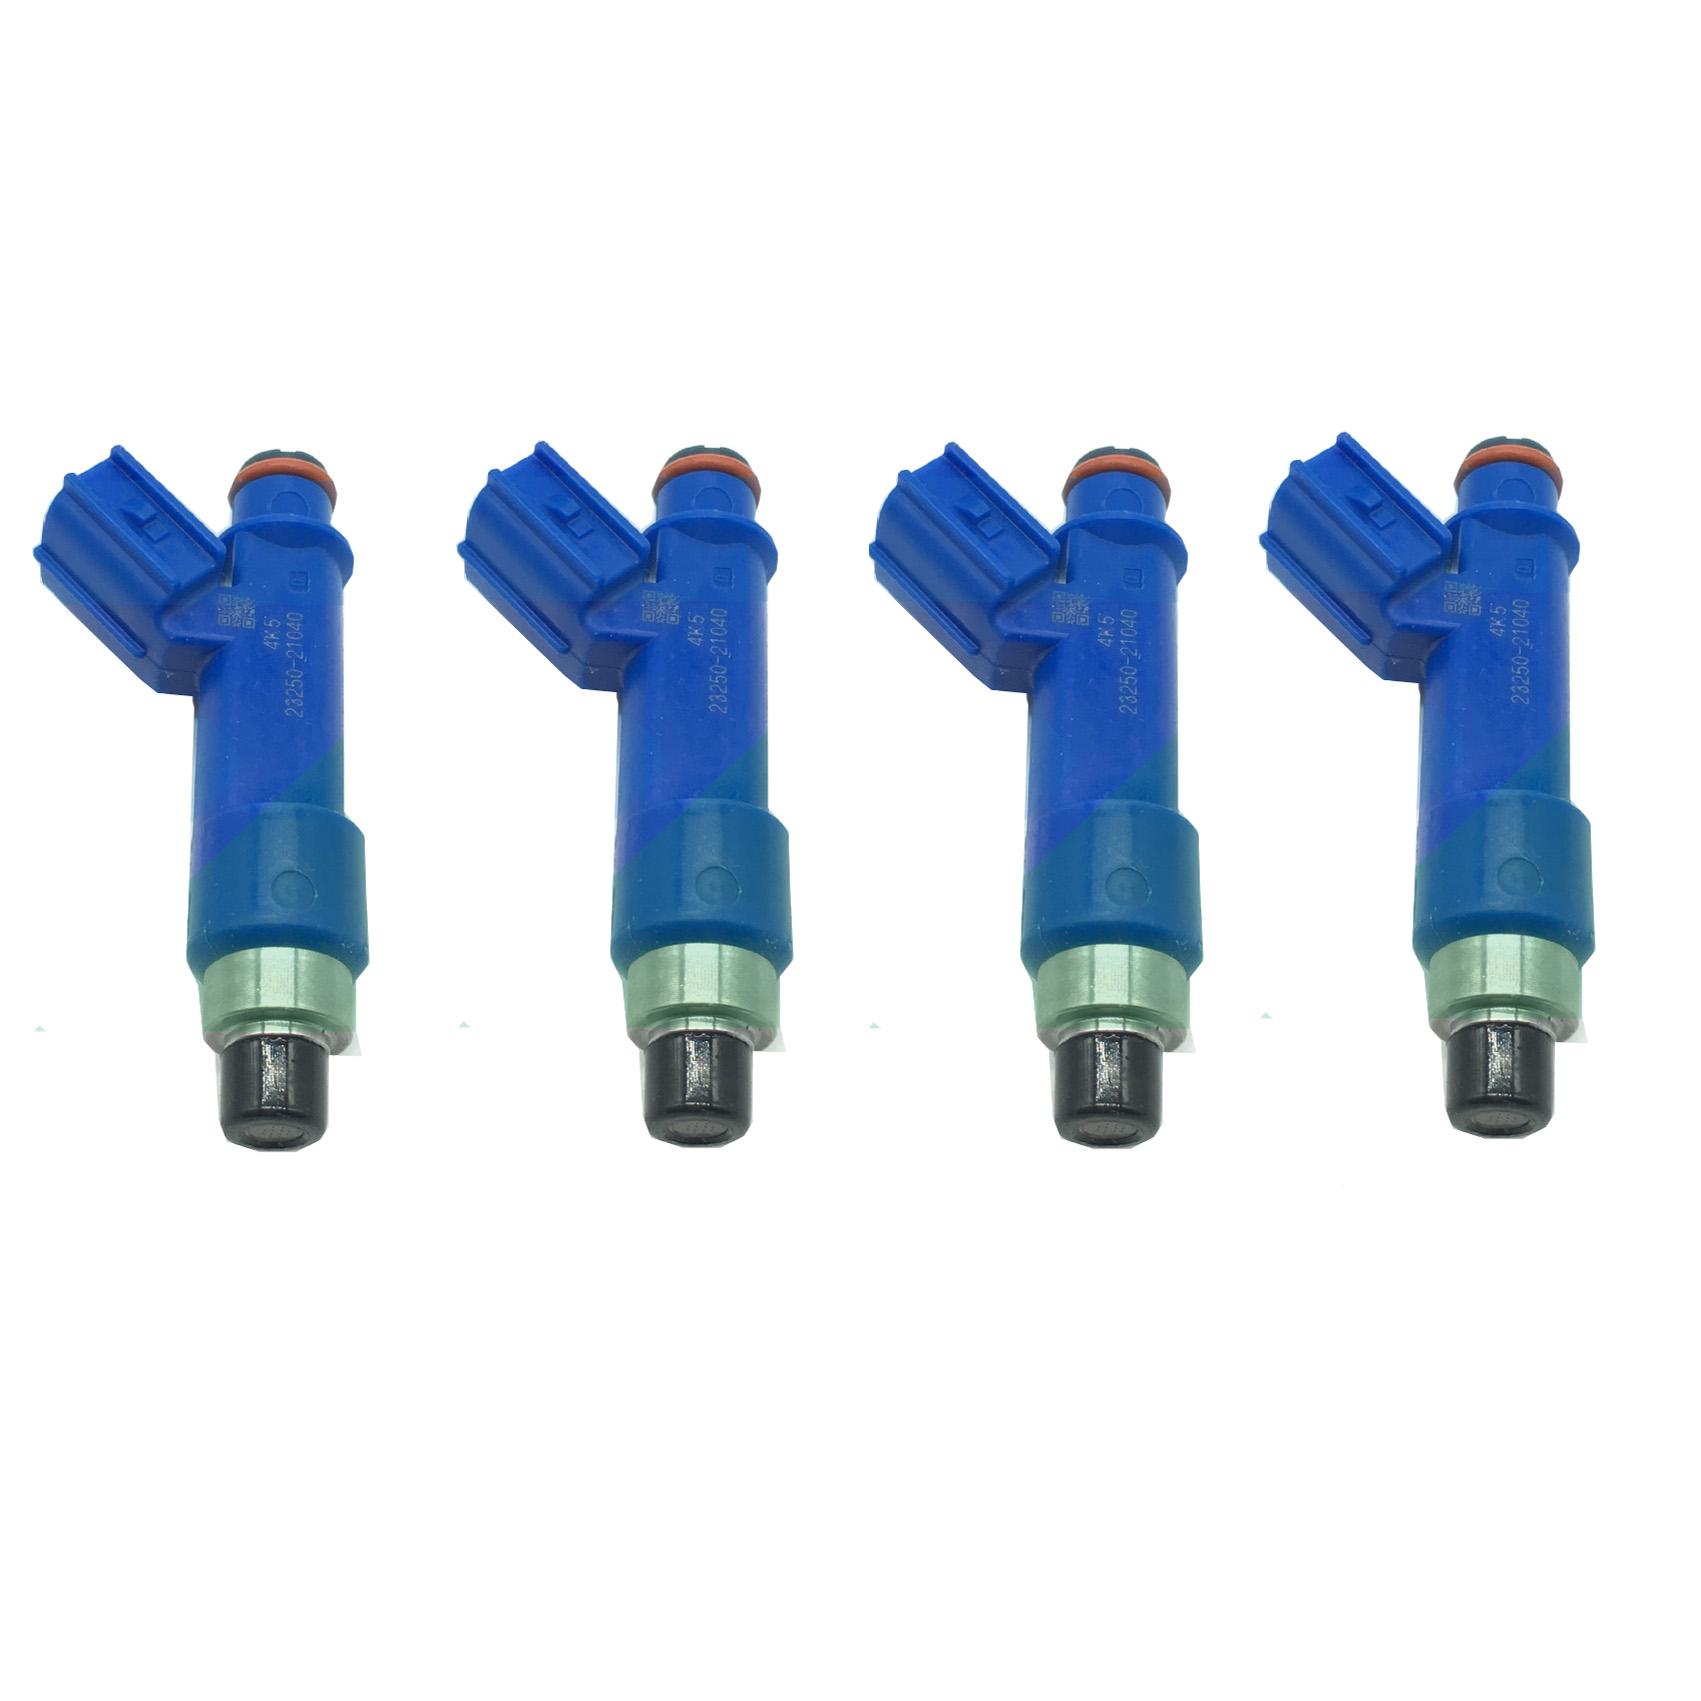 4x Genuine Denso fuel injectors for 2006-2014 Toyota Yaris 1.5L (23250-21040)